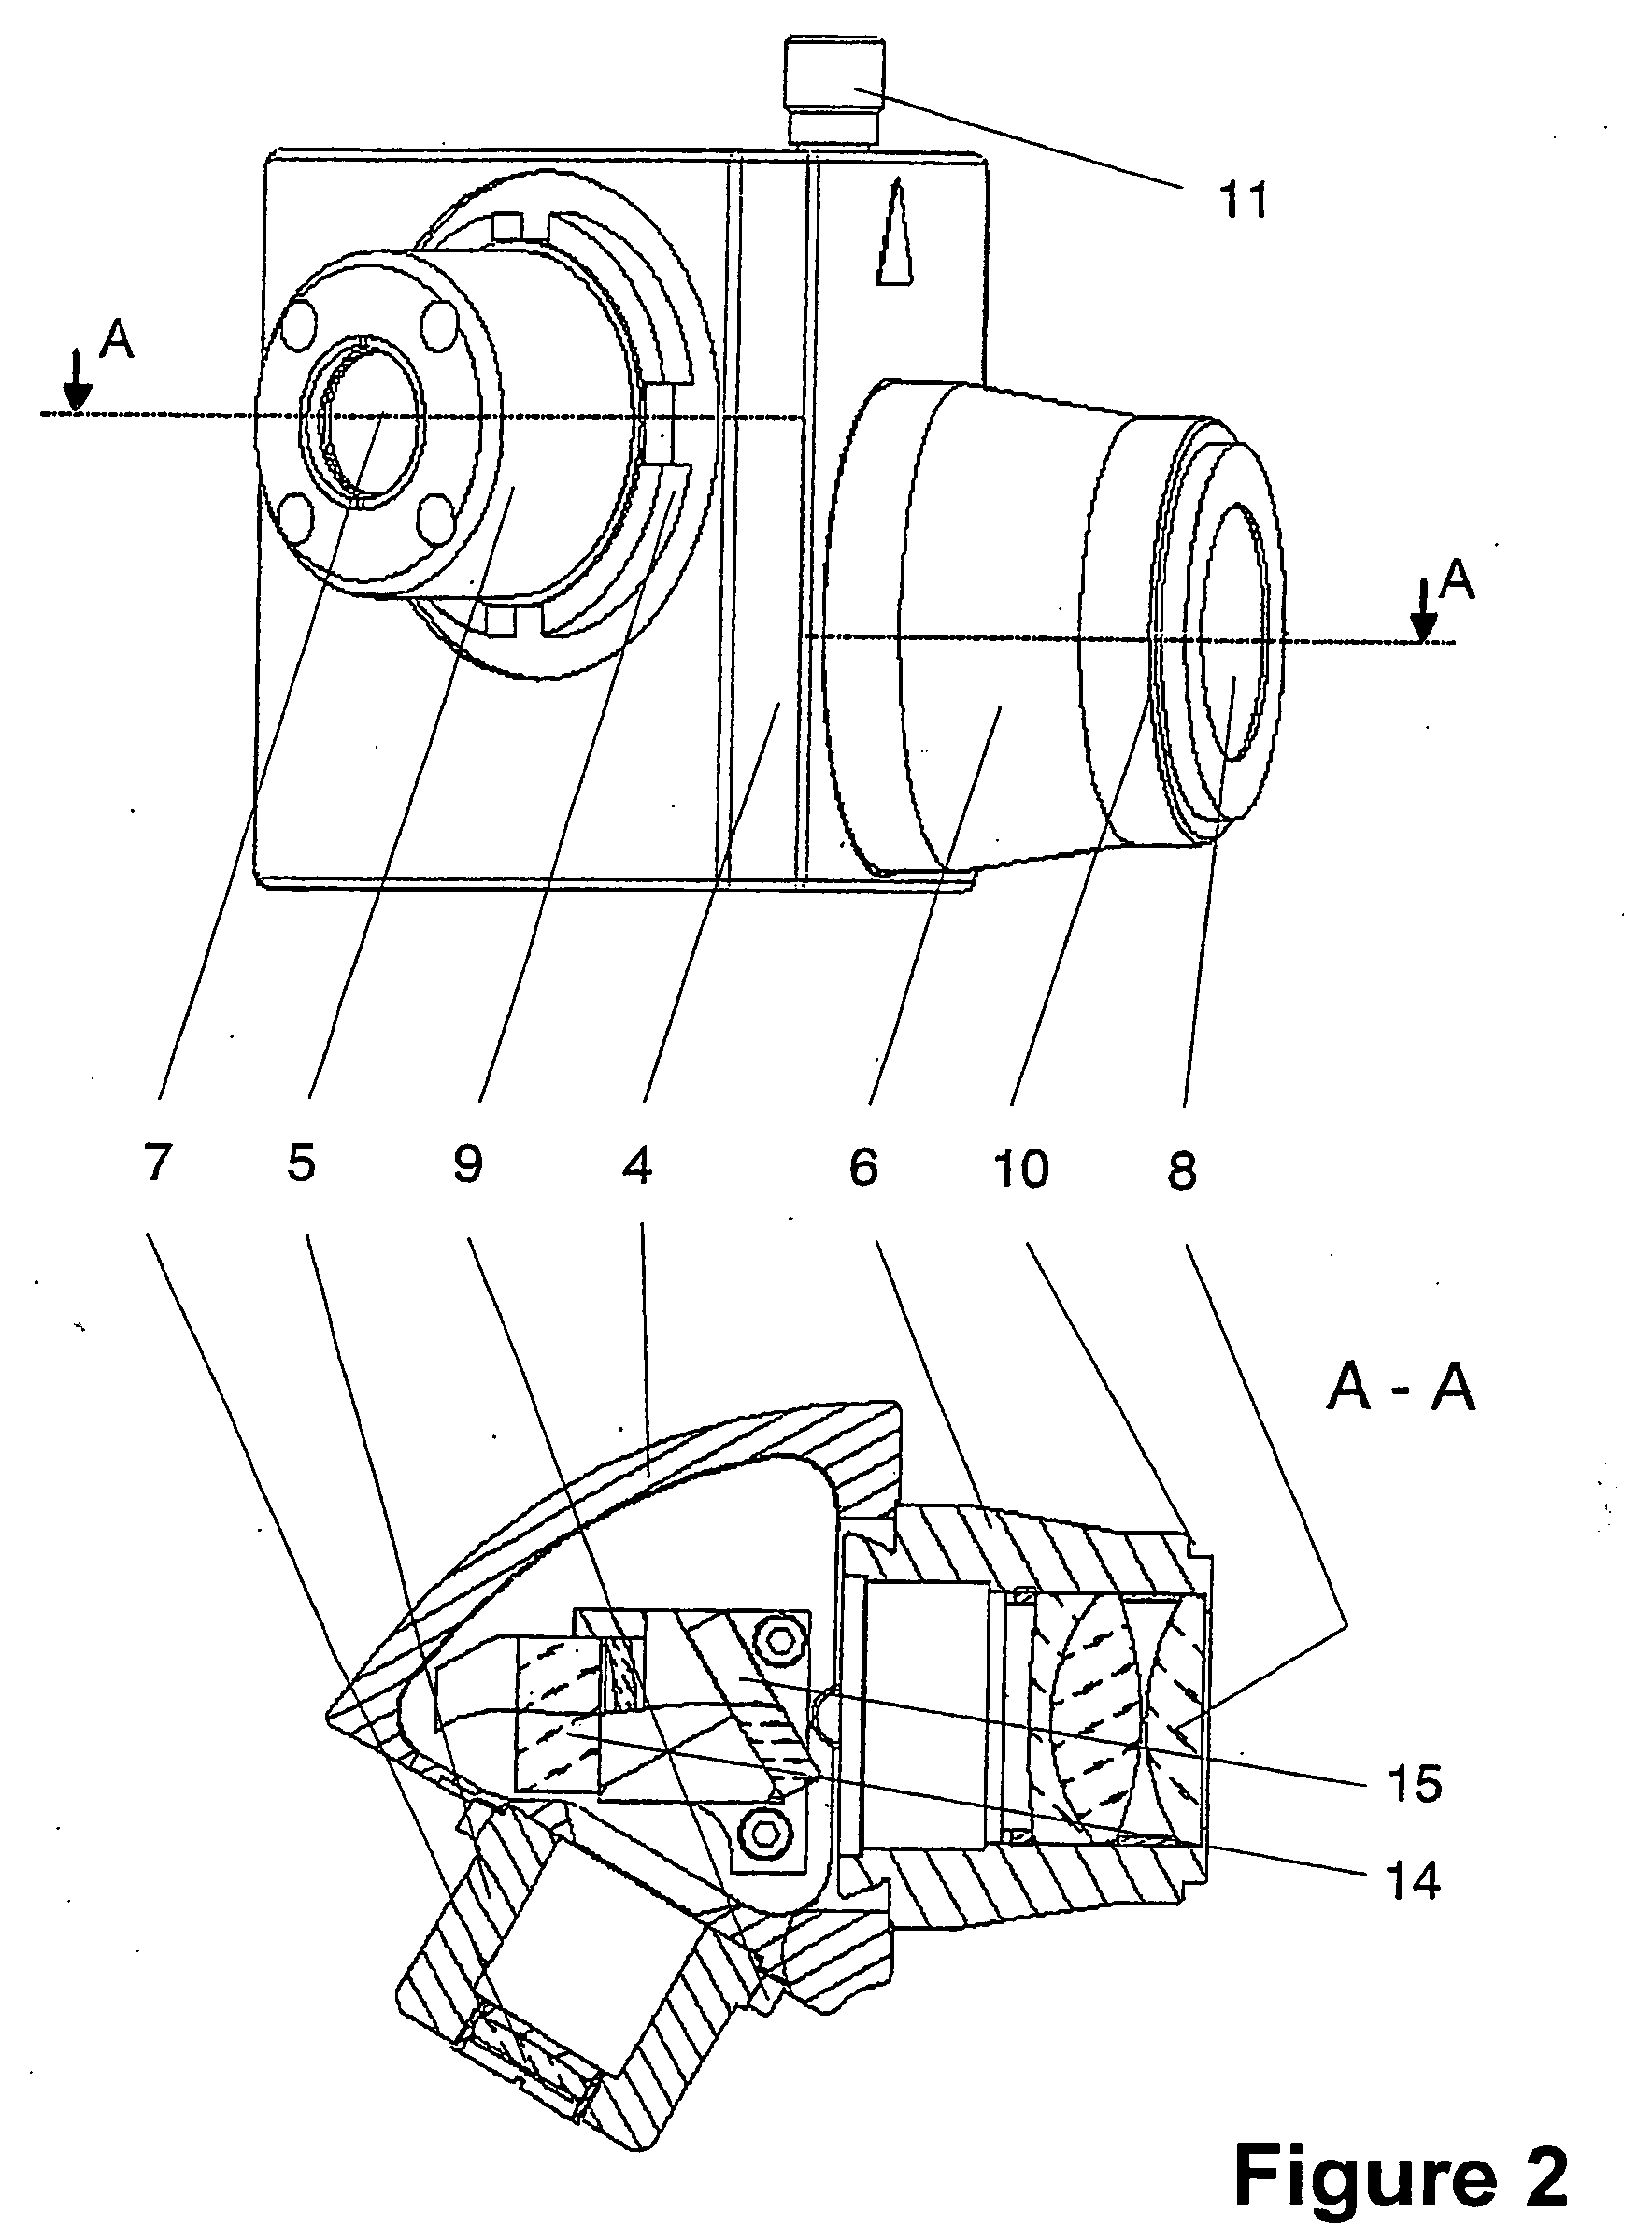 Camera adapter for optical devices, in patricular microscopes